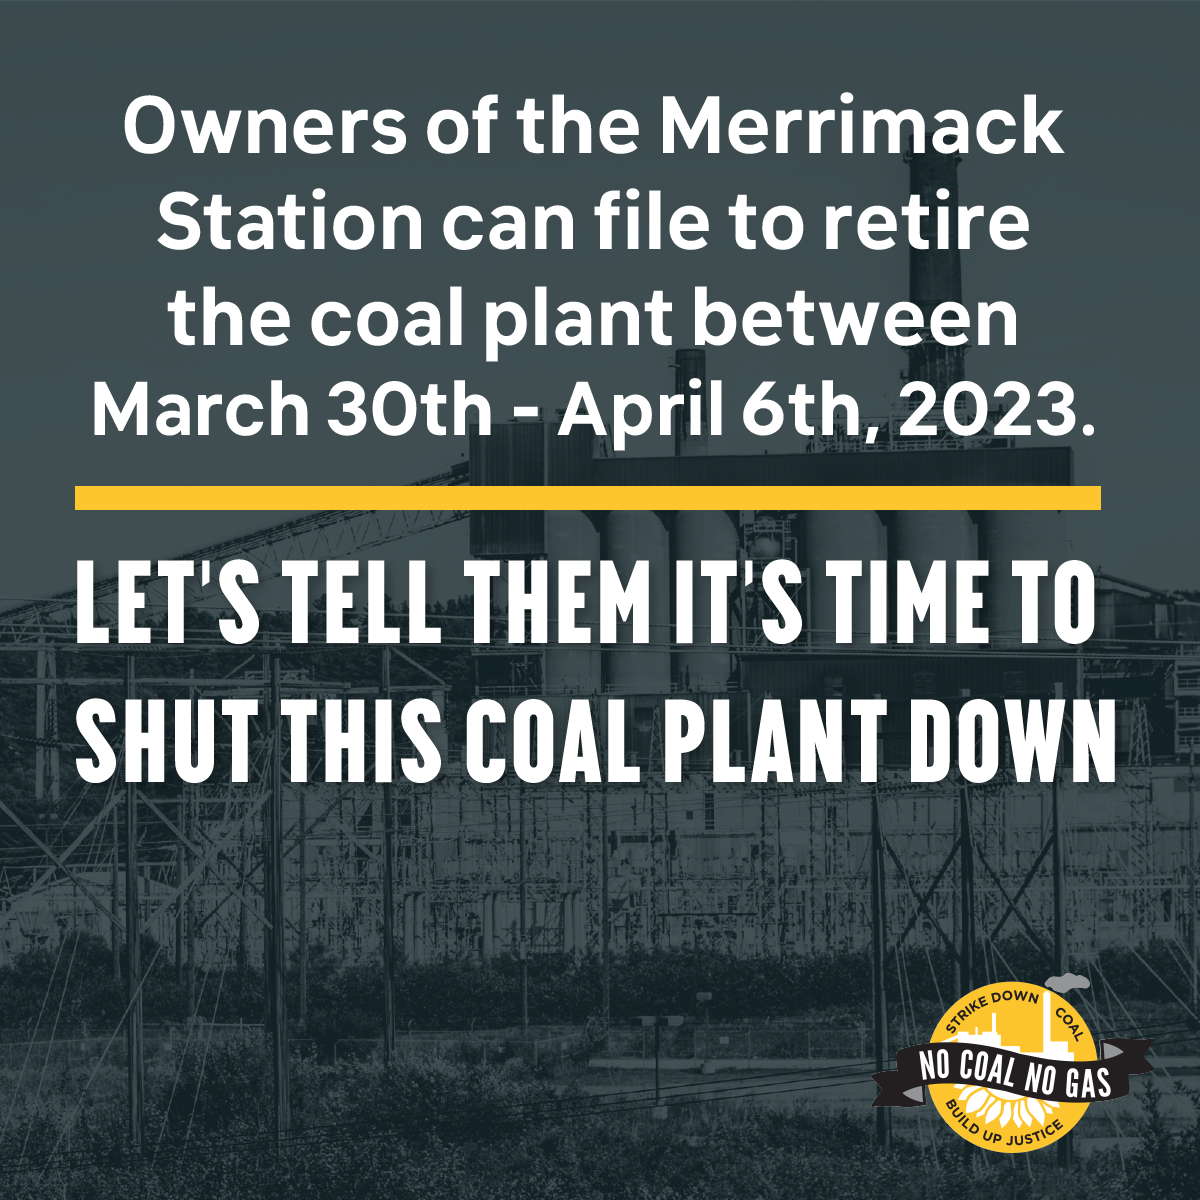 The owners of the last coal fired power plant in New England can file to retire the plant March 30-April 6 Tell them it's time to retire this coal plant for good